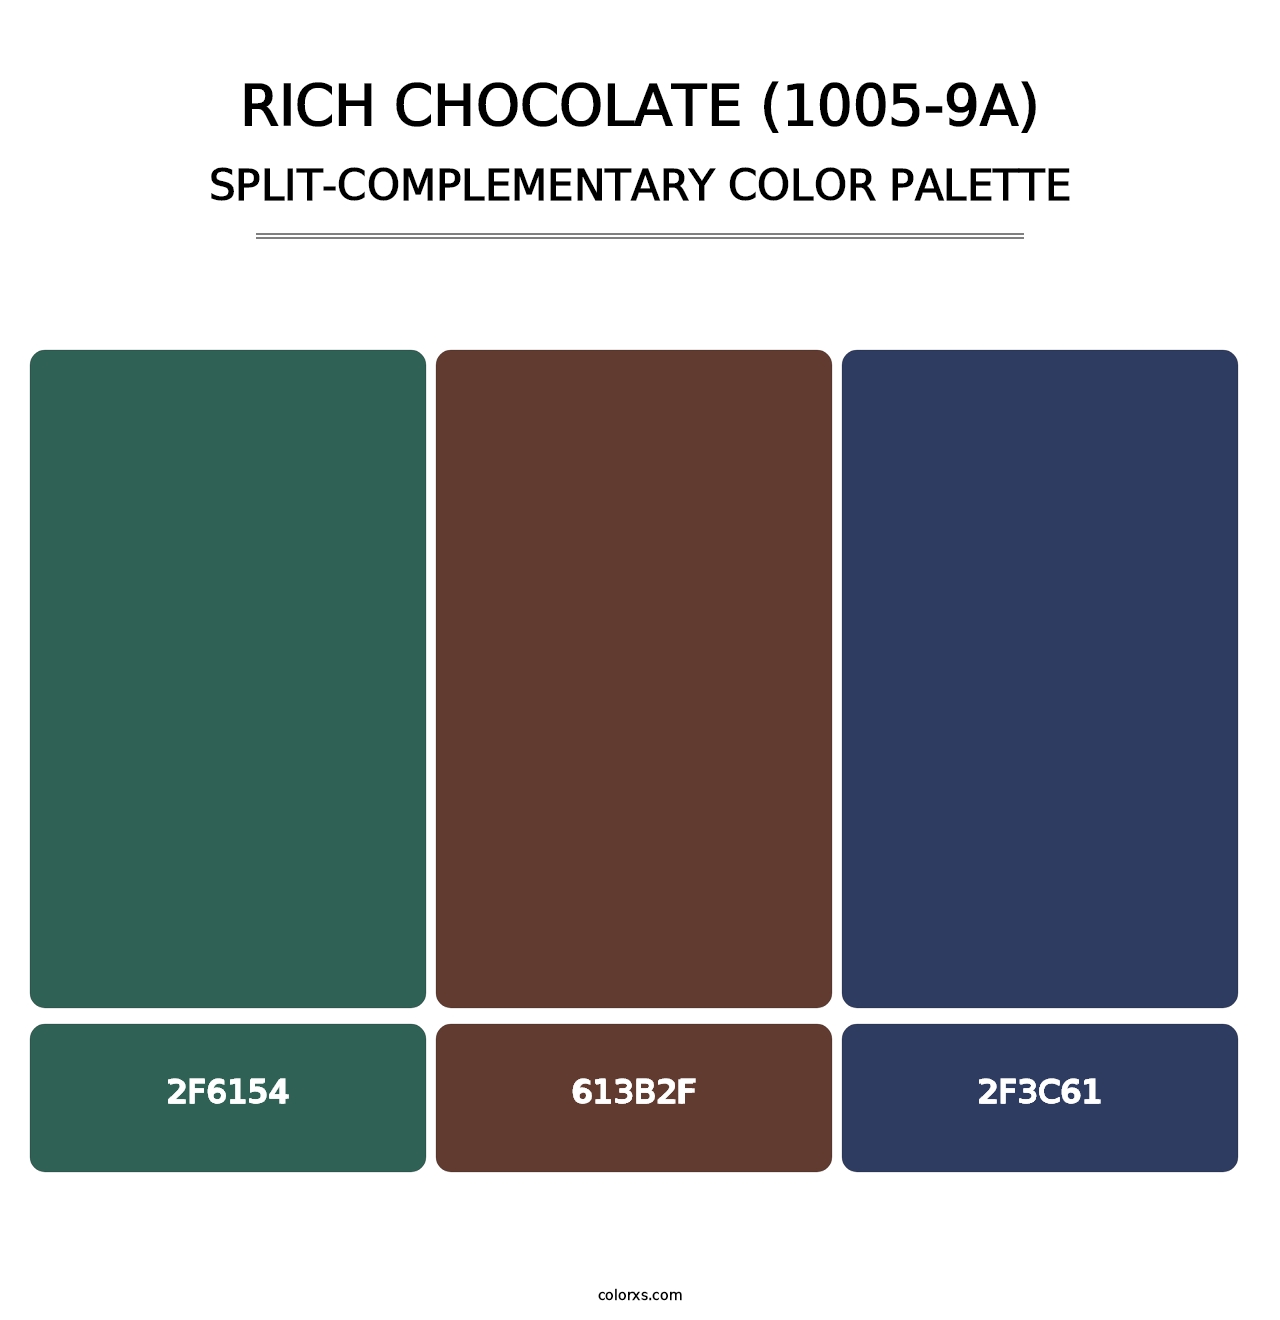 Rich Chocolate (1005-9A) - Split-Complementary Color Palette